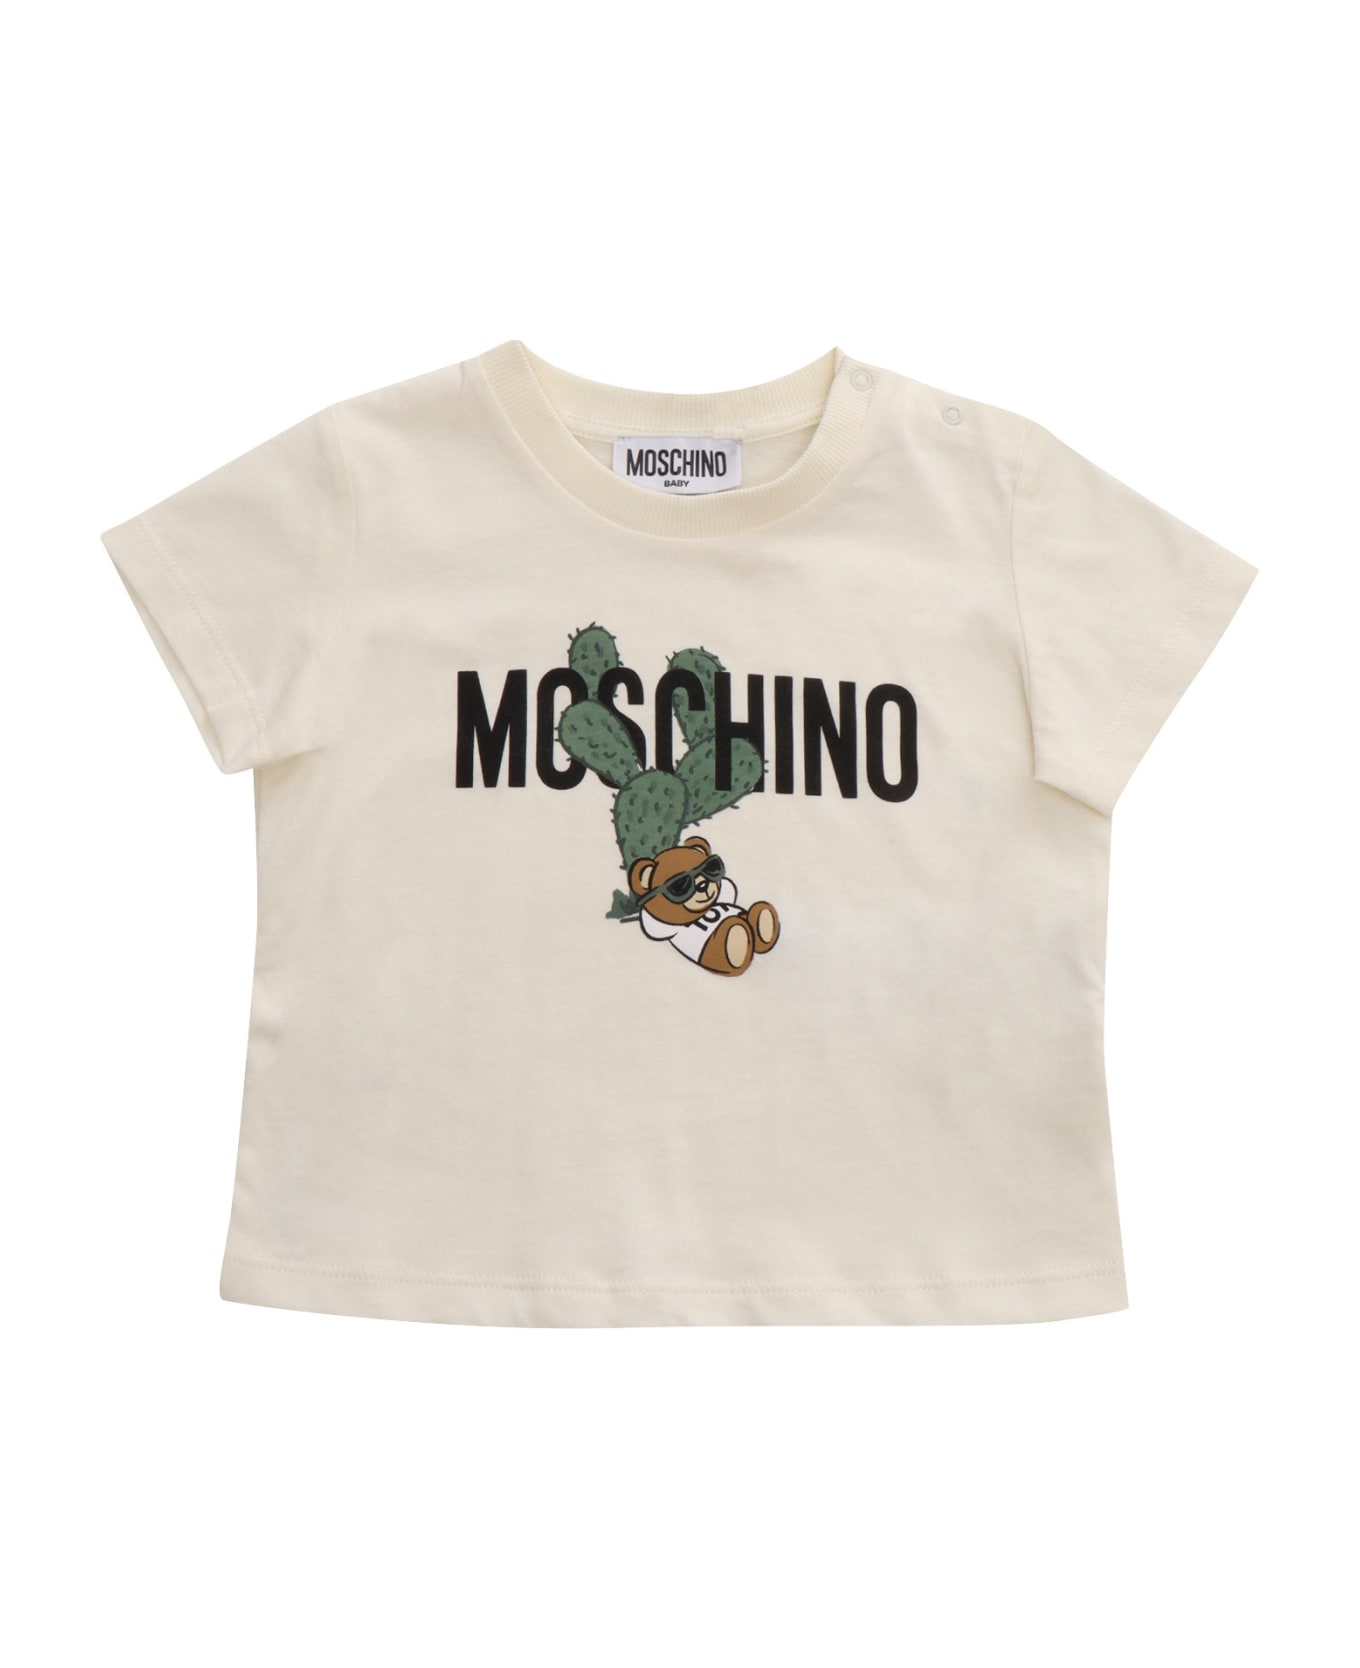 Moschino Cream Colored T-shirt With Pattern - PANNA シャツ